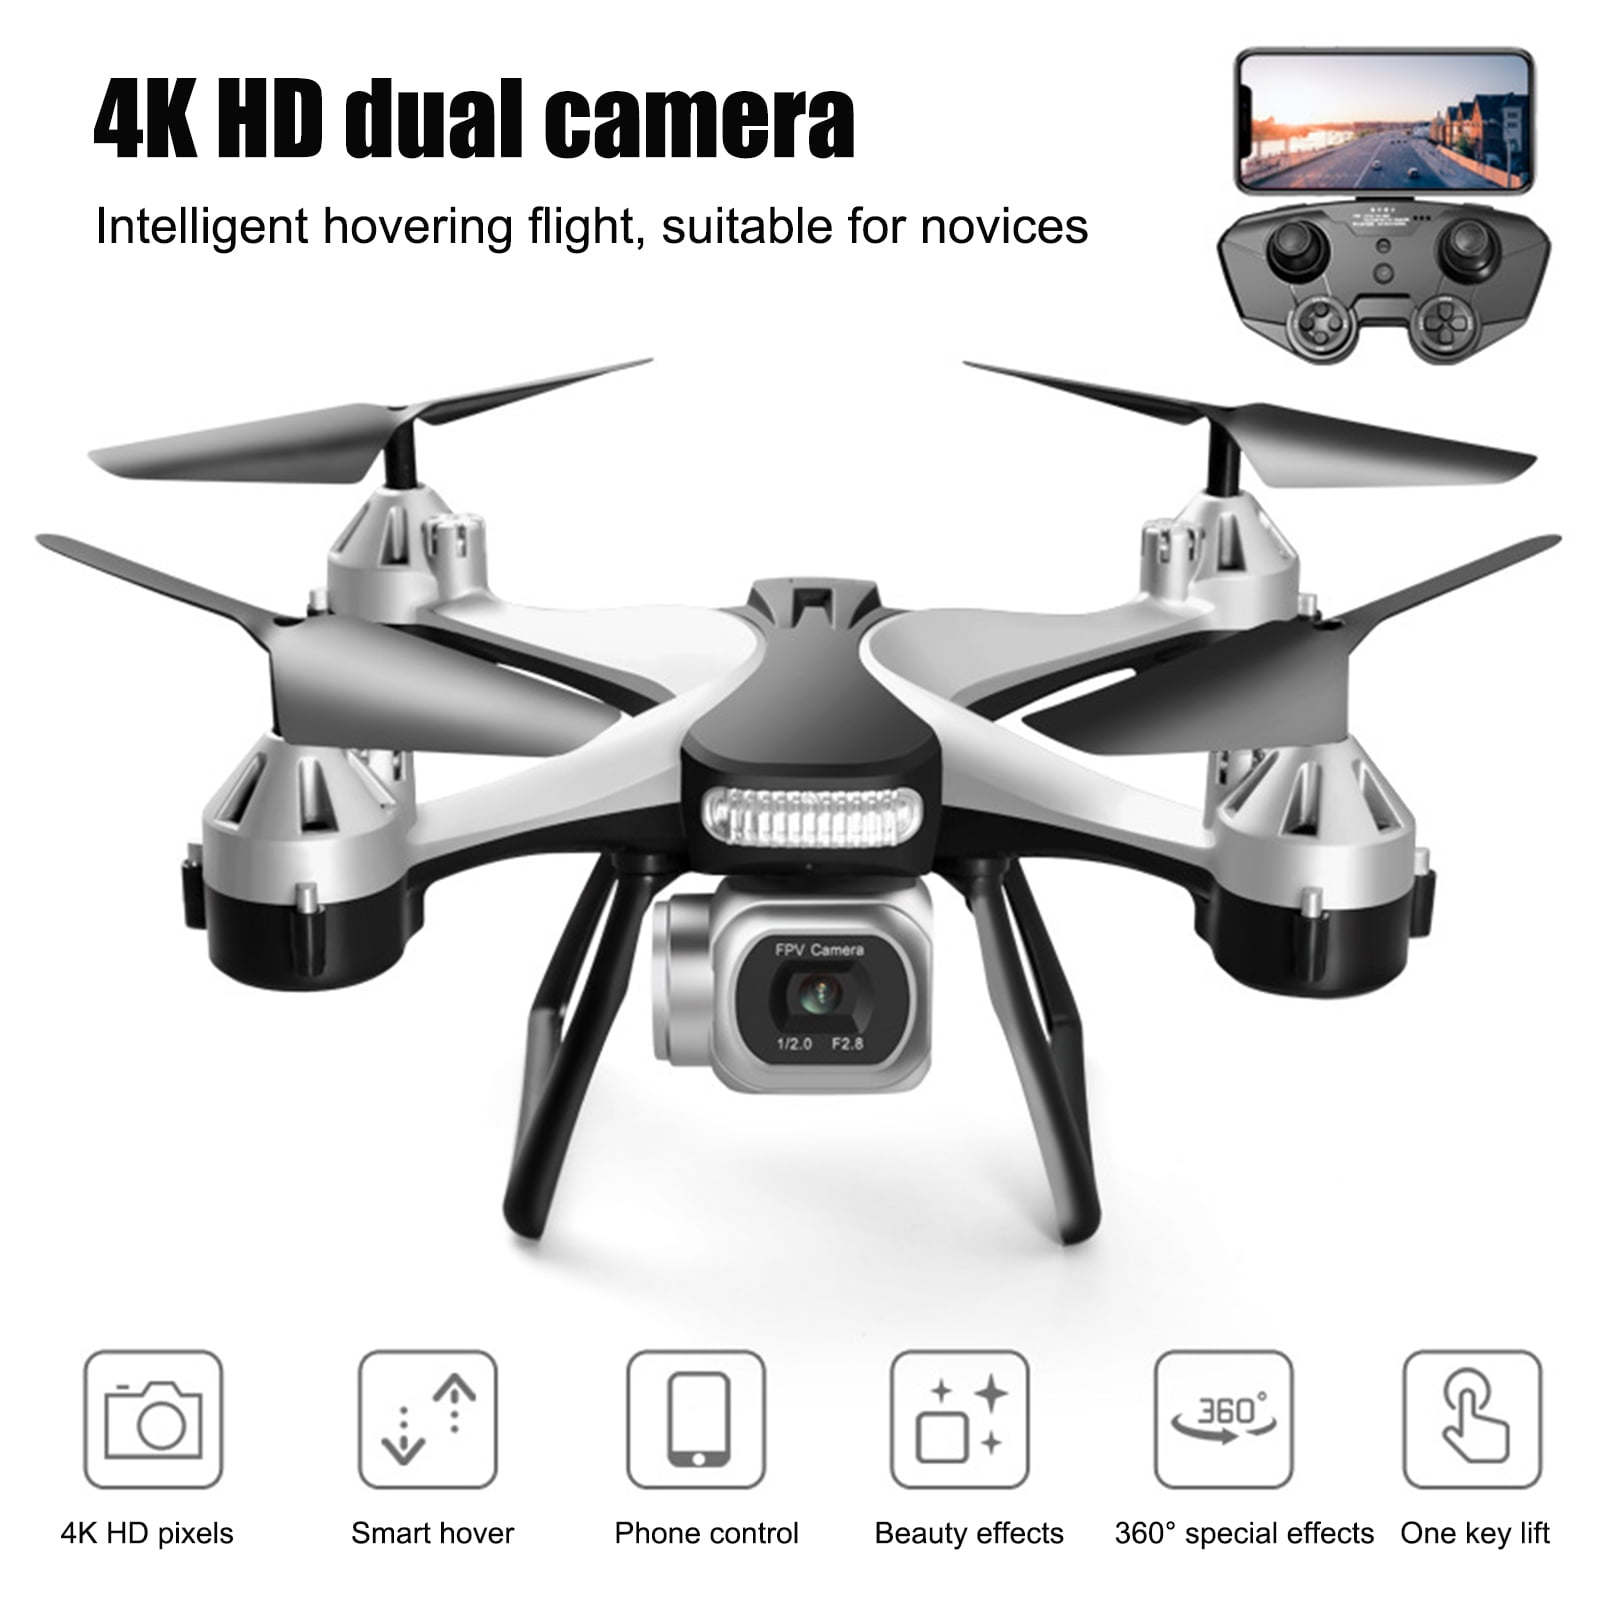 Mini Drone 4K HD Camera, Helicopter Quadcopter with Headless Mode, Altitude Hold, 360° Flip, Indoor Drone Great Gift for Boys Girls (White) - Walmart.com